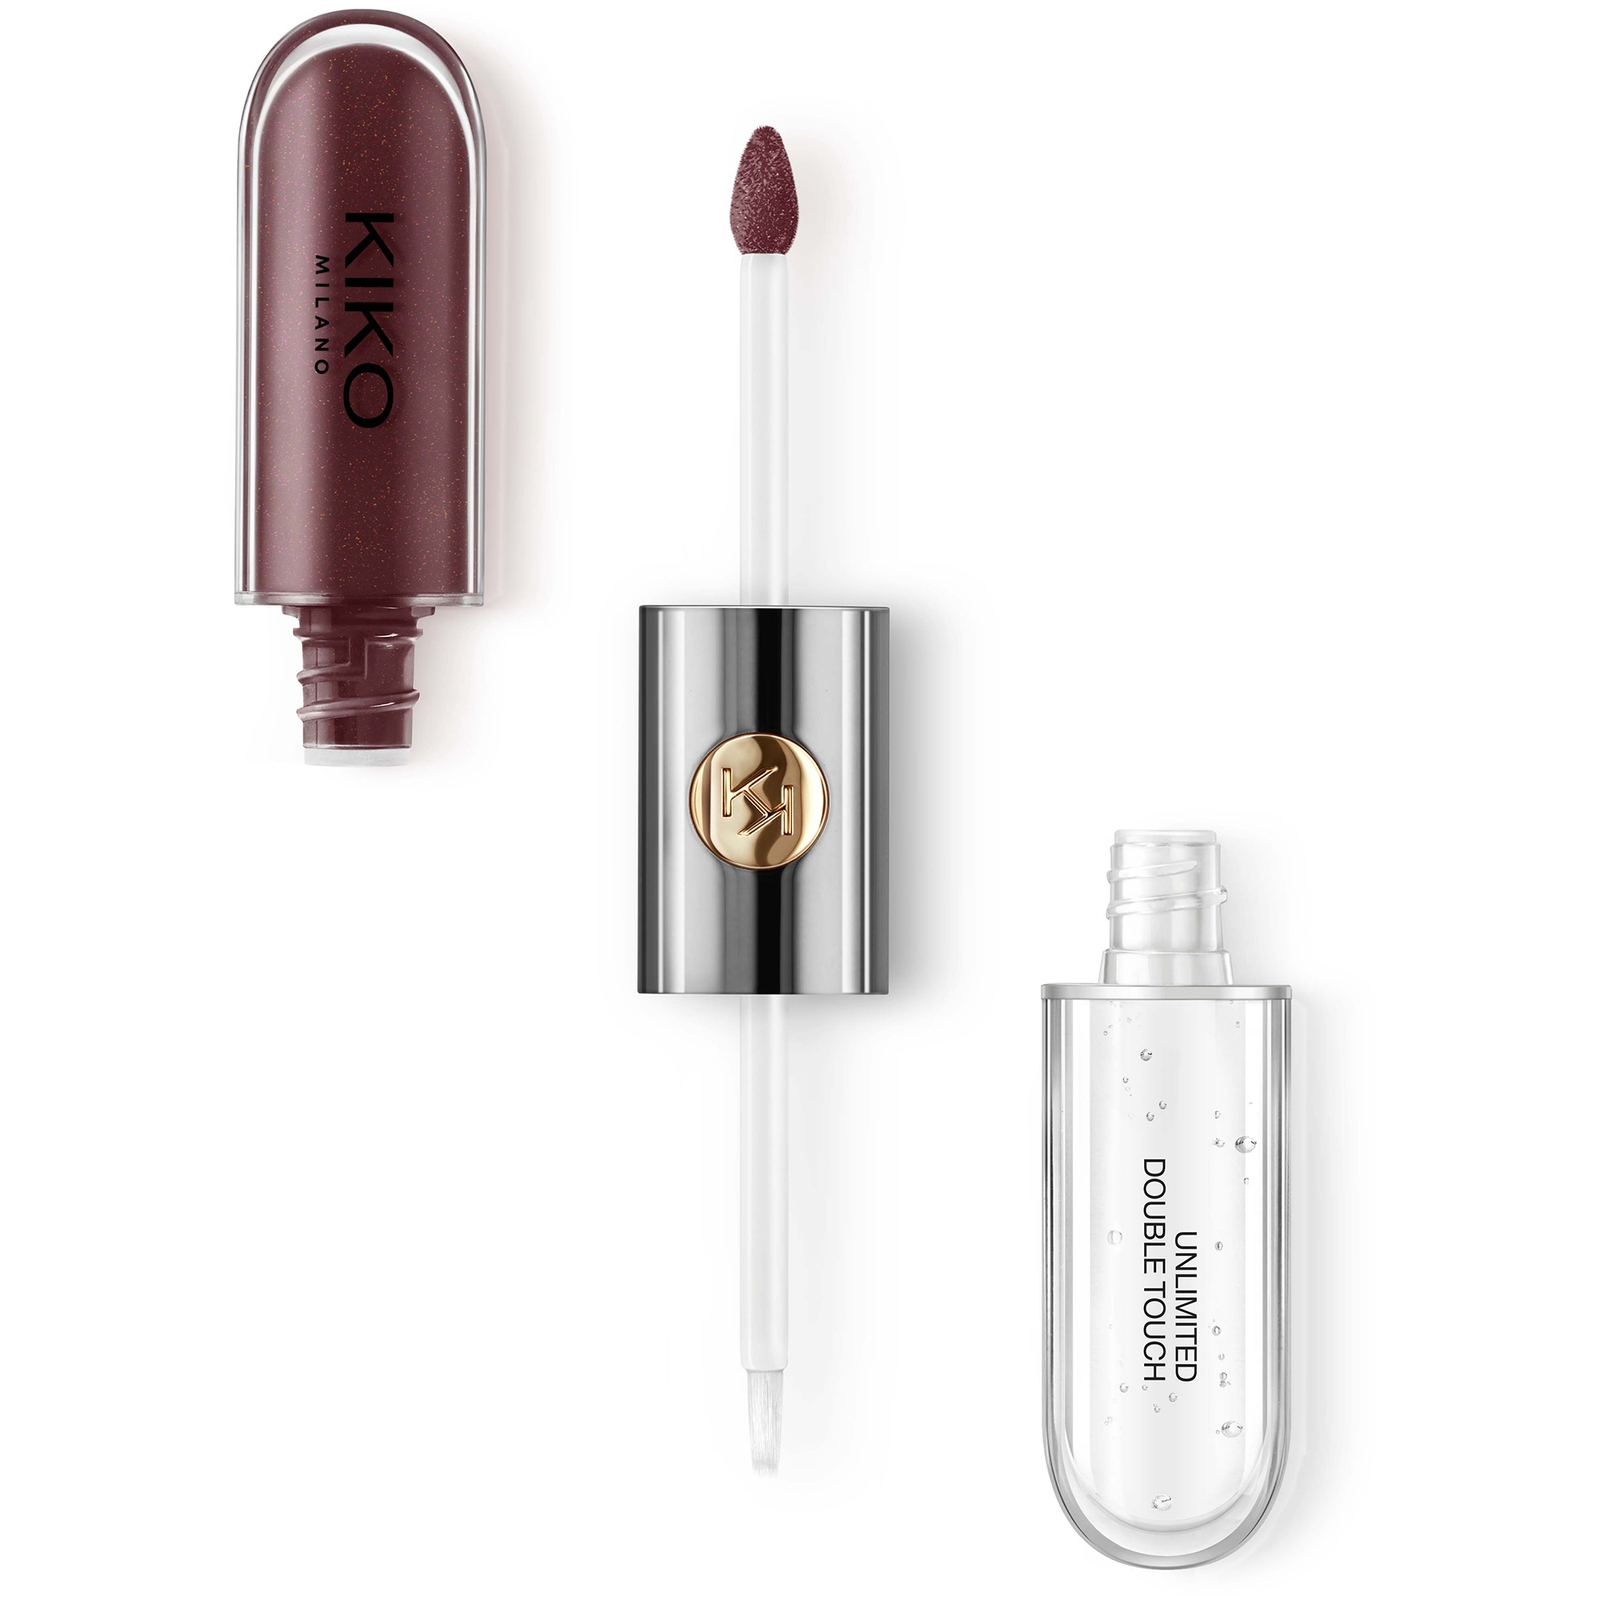 KIKO Milano Unlimited Double Touch 6ml (Various Shades) - 122 Bordeaux